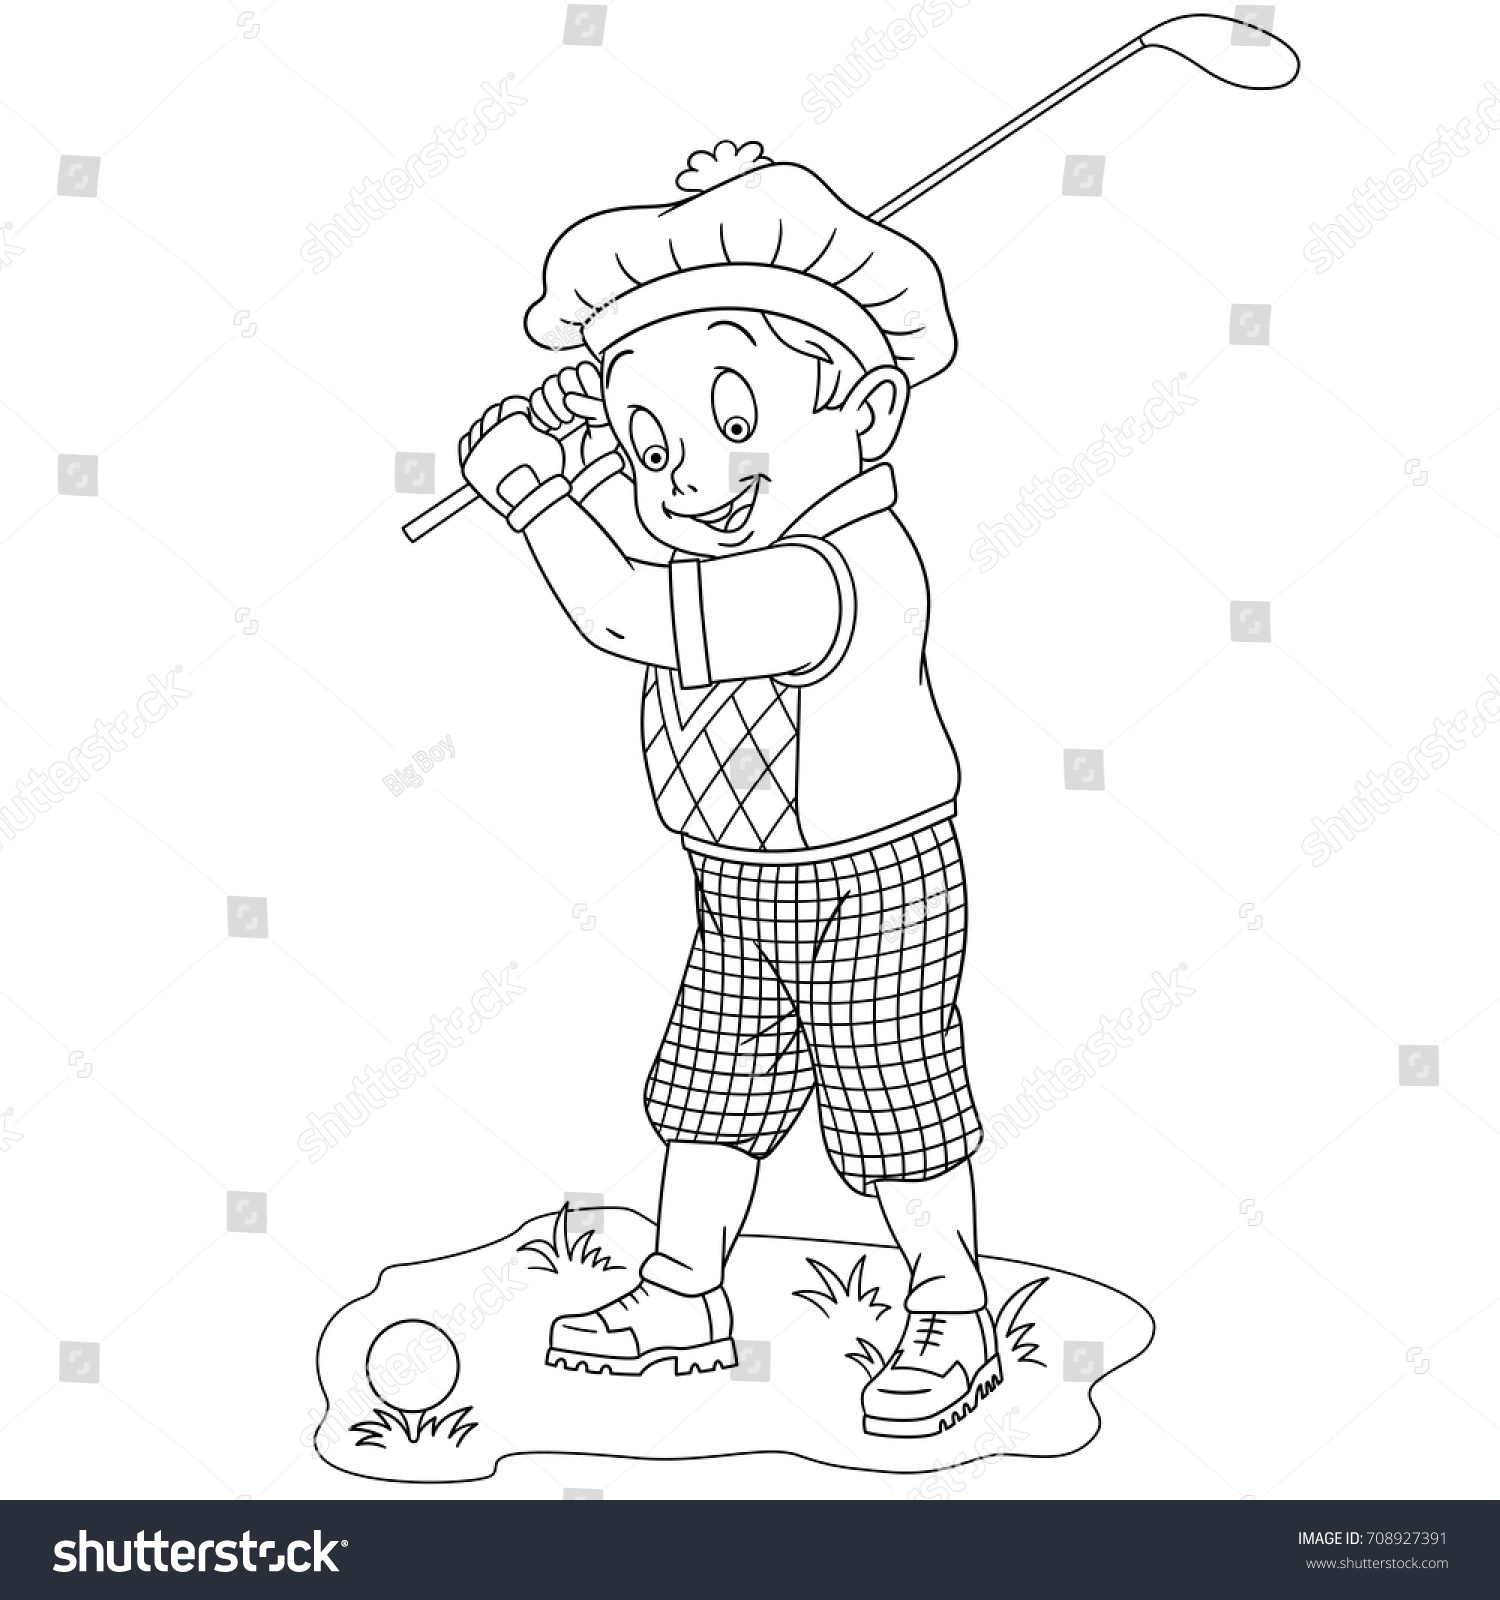 Coloring Page Cartoon Golfer Golf Player Stock Vector 708927391